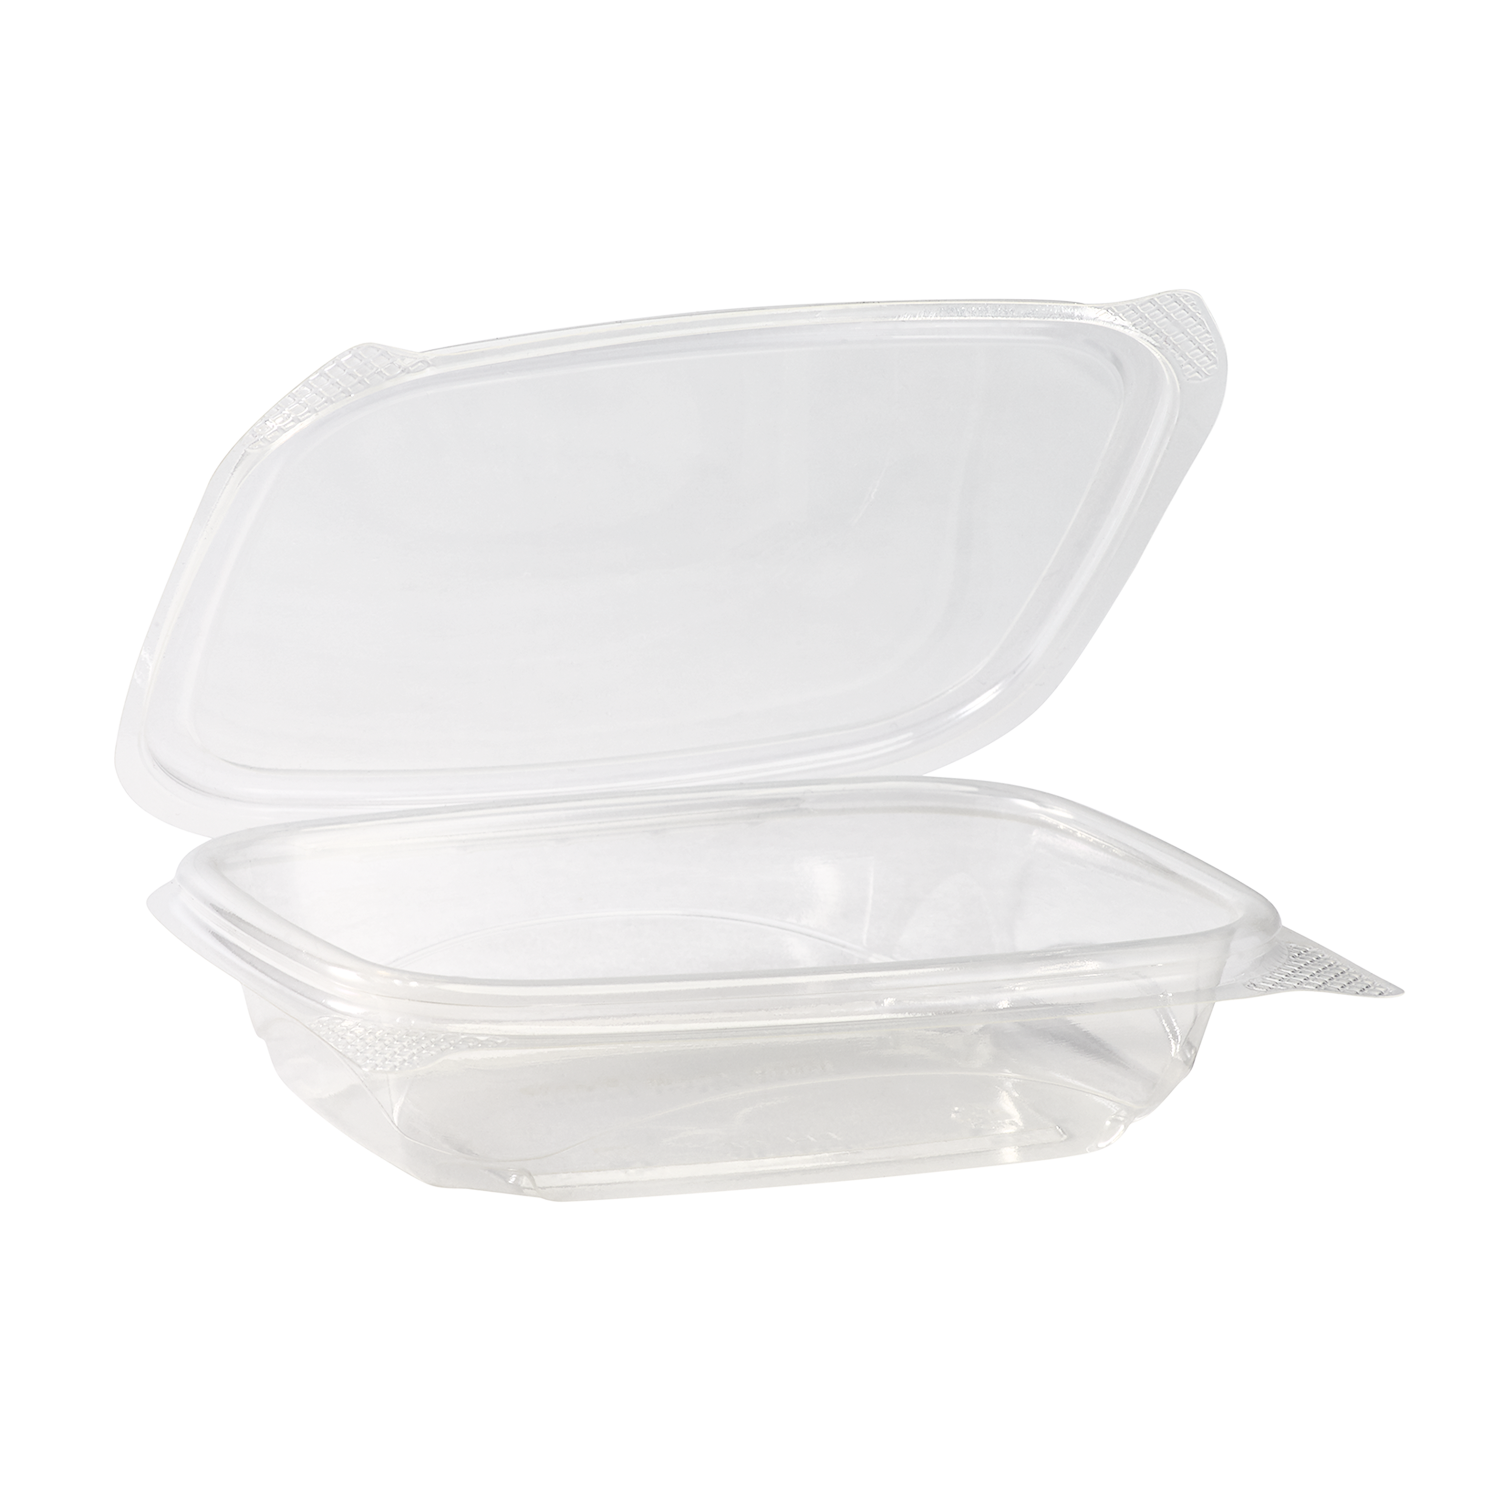 32 oz Hinged Deli Box - Clear Compostable PLA - 200 ct